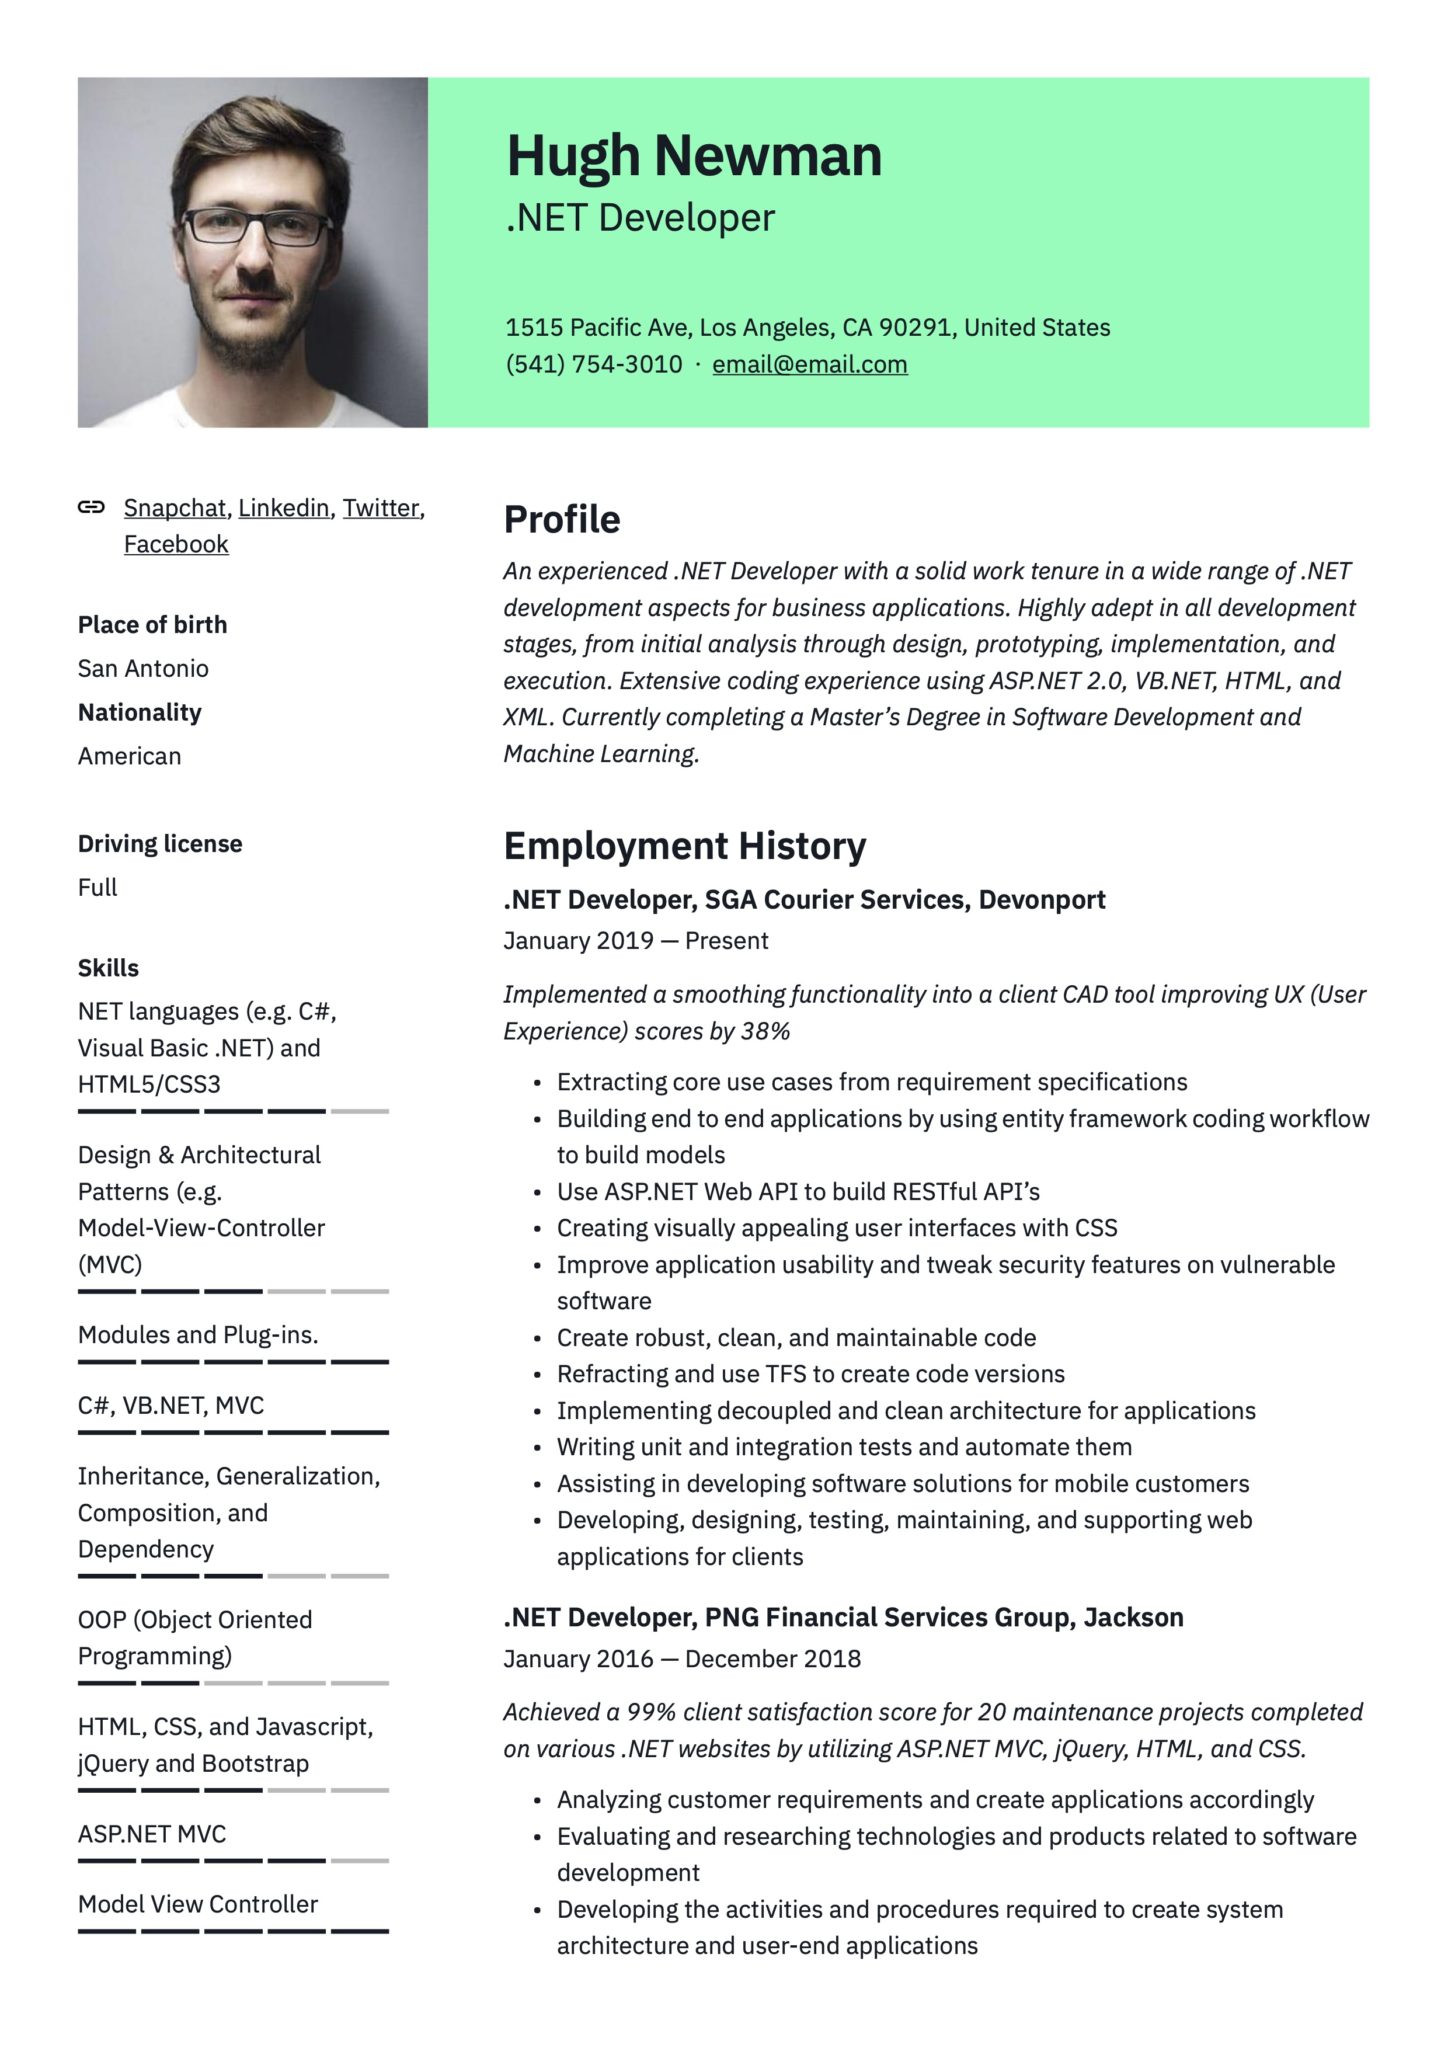 Resume Samples for Experienced Professionals In Net Net Developer Resume & Writing Guide  17 Templates 2022